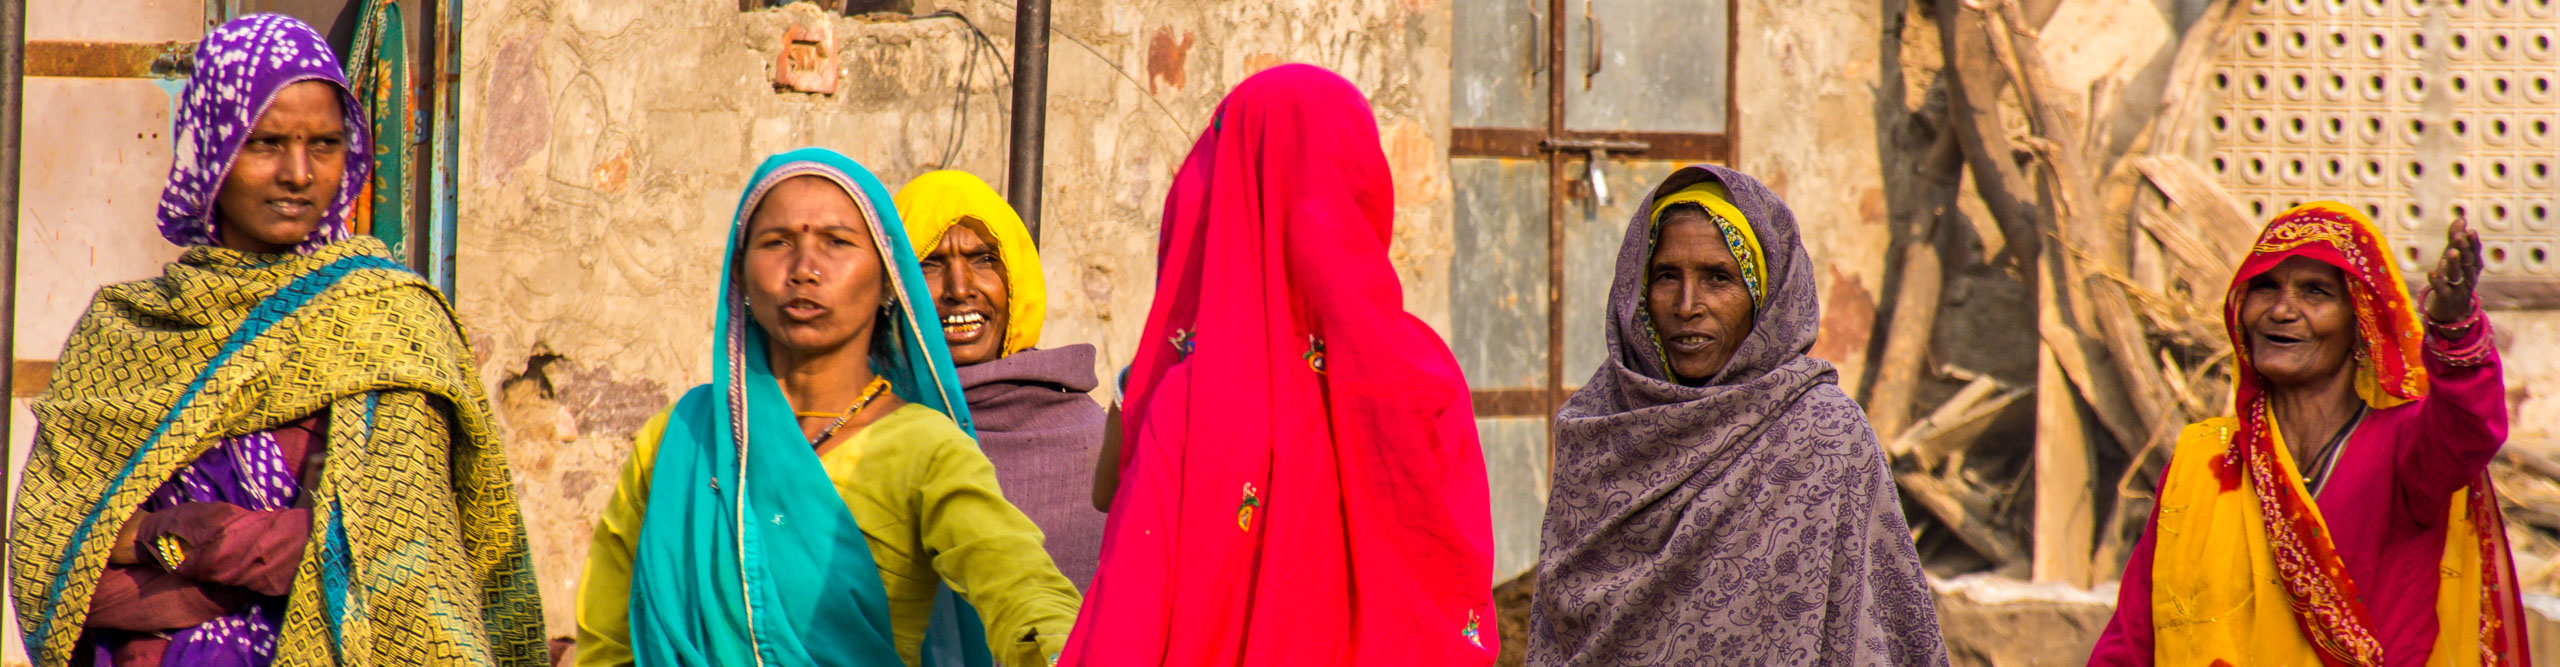 Group of local women weaning sari's in different colours, India 